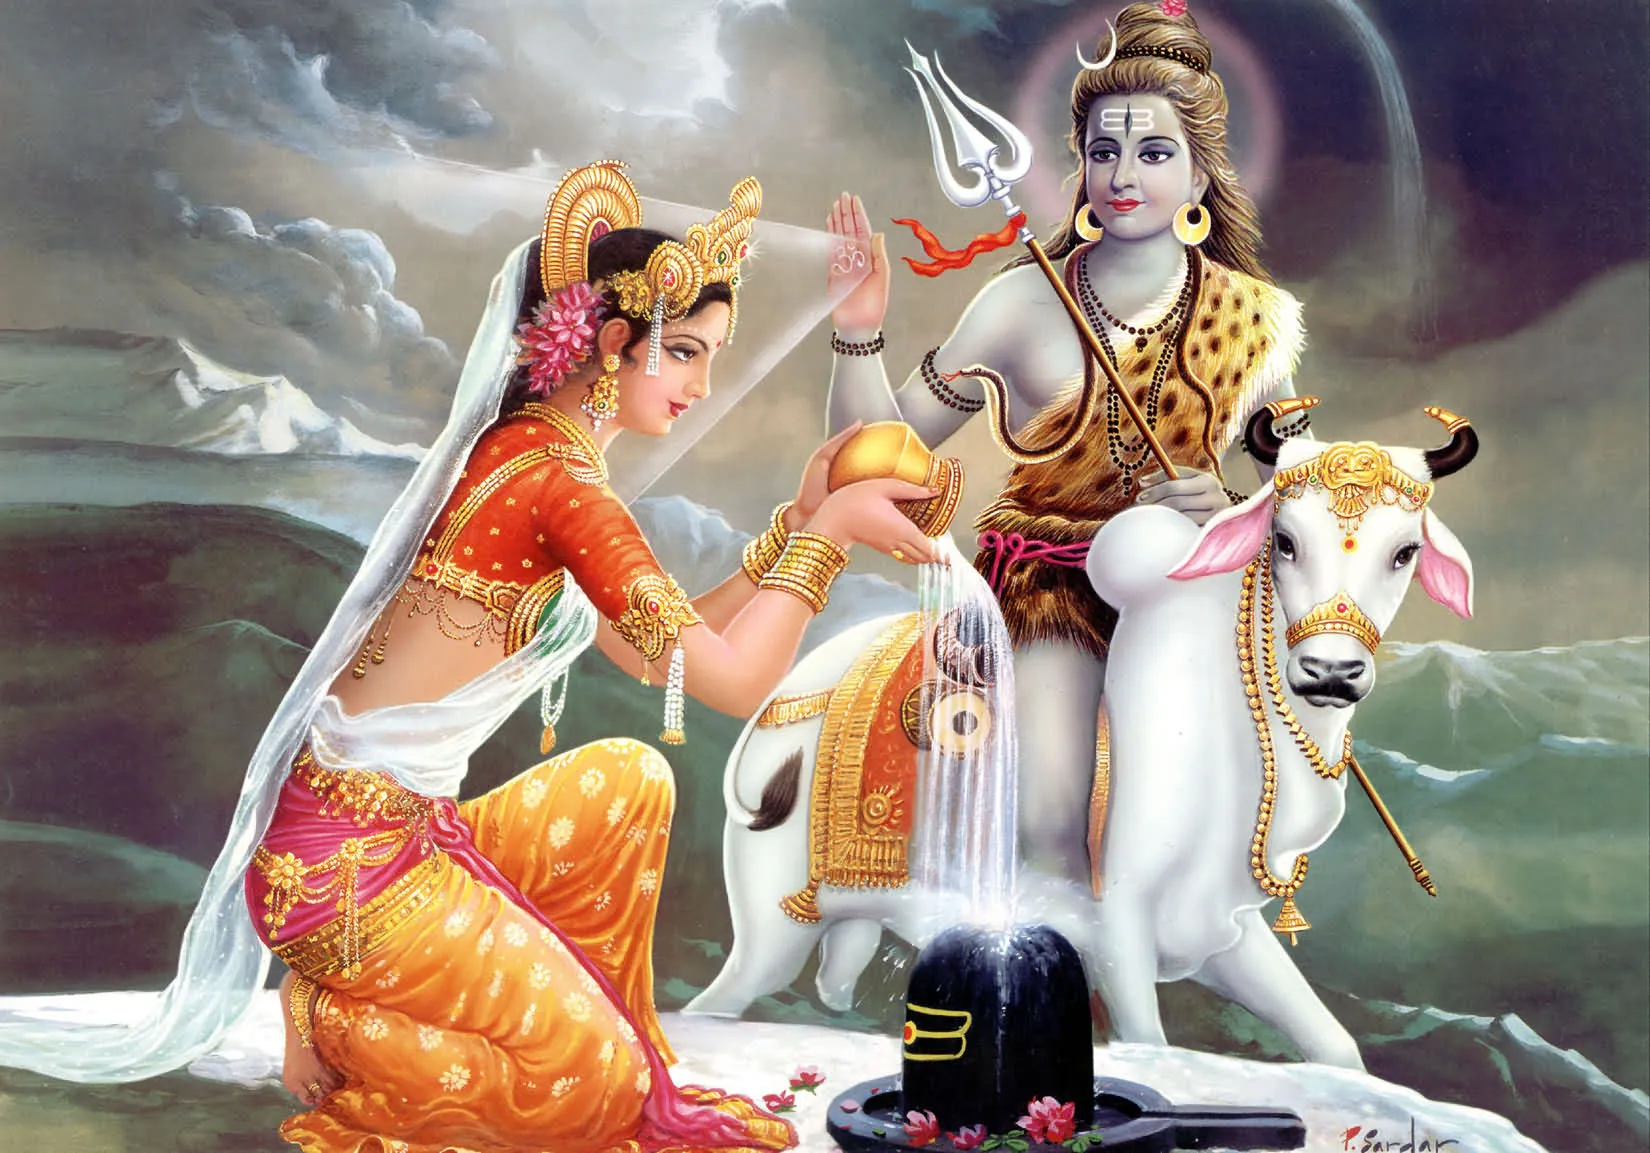 The Divine Union: The Mythical Wedding of Shiva and Parvati